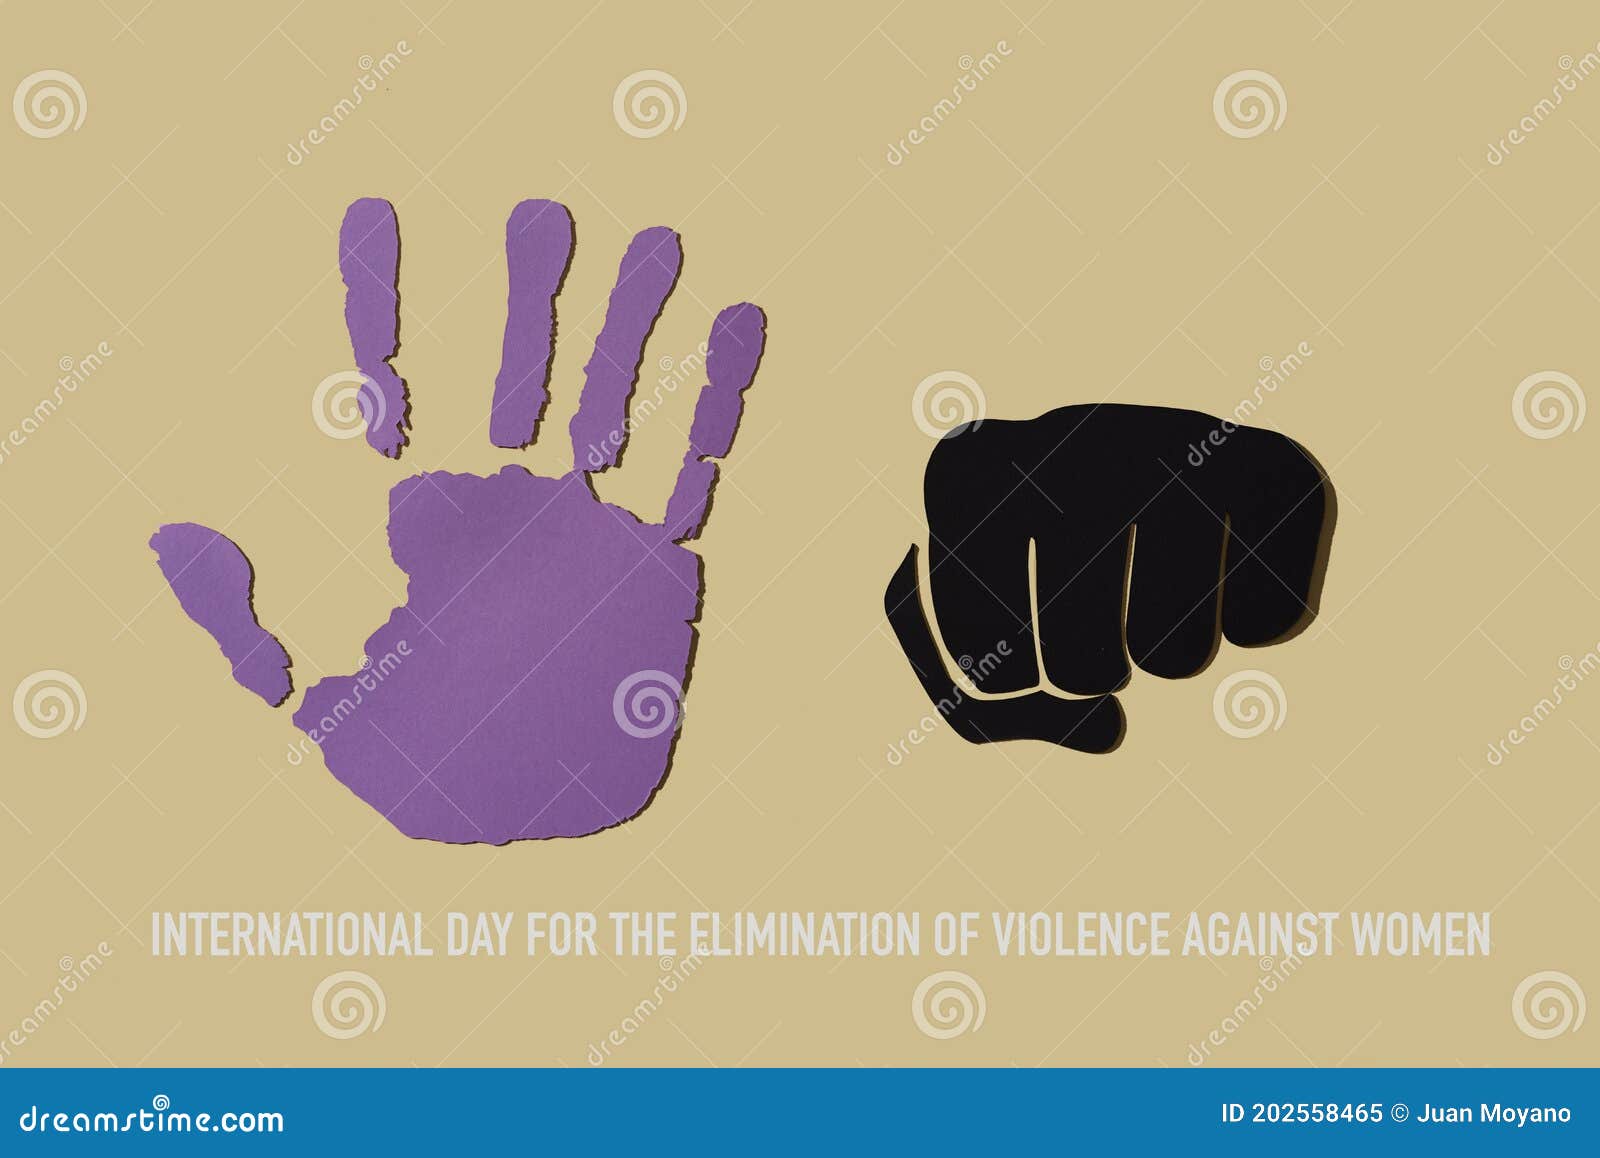 day for the elimination of violence against women